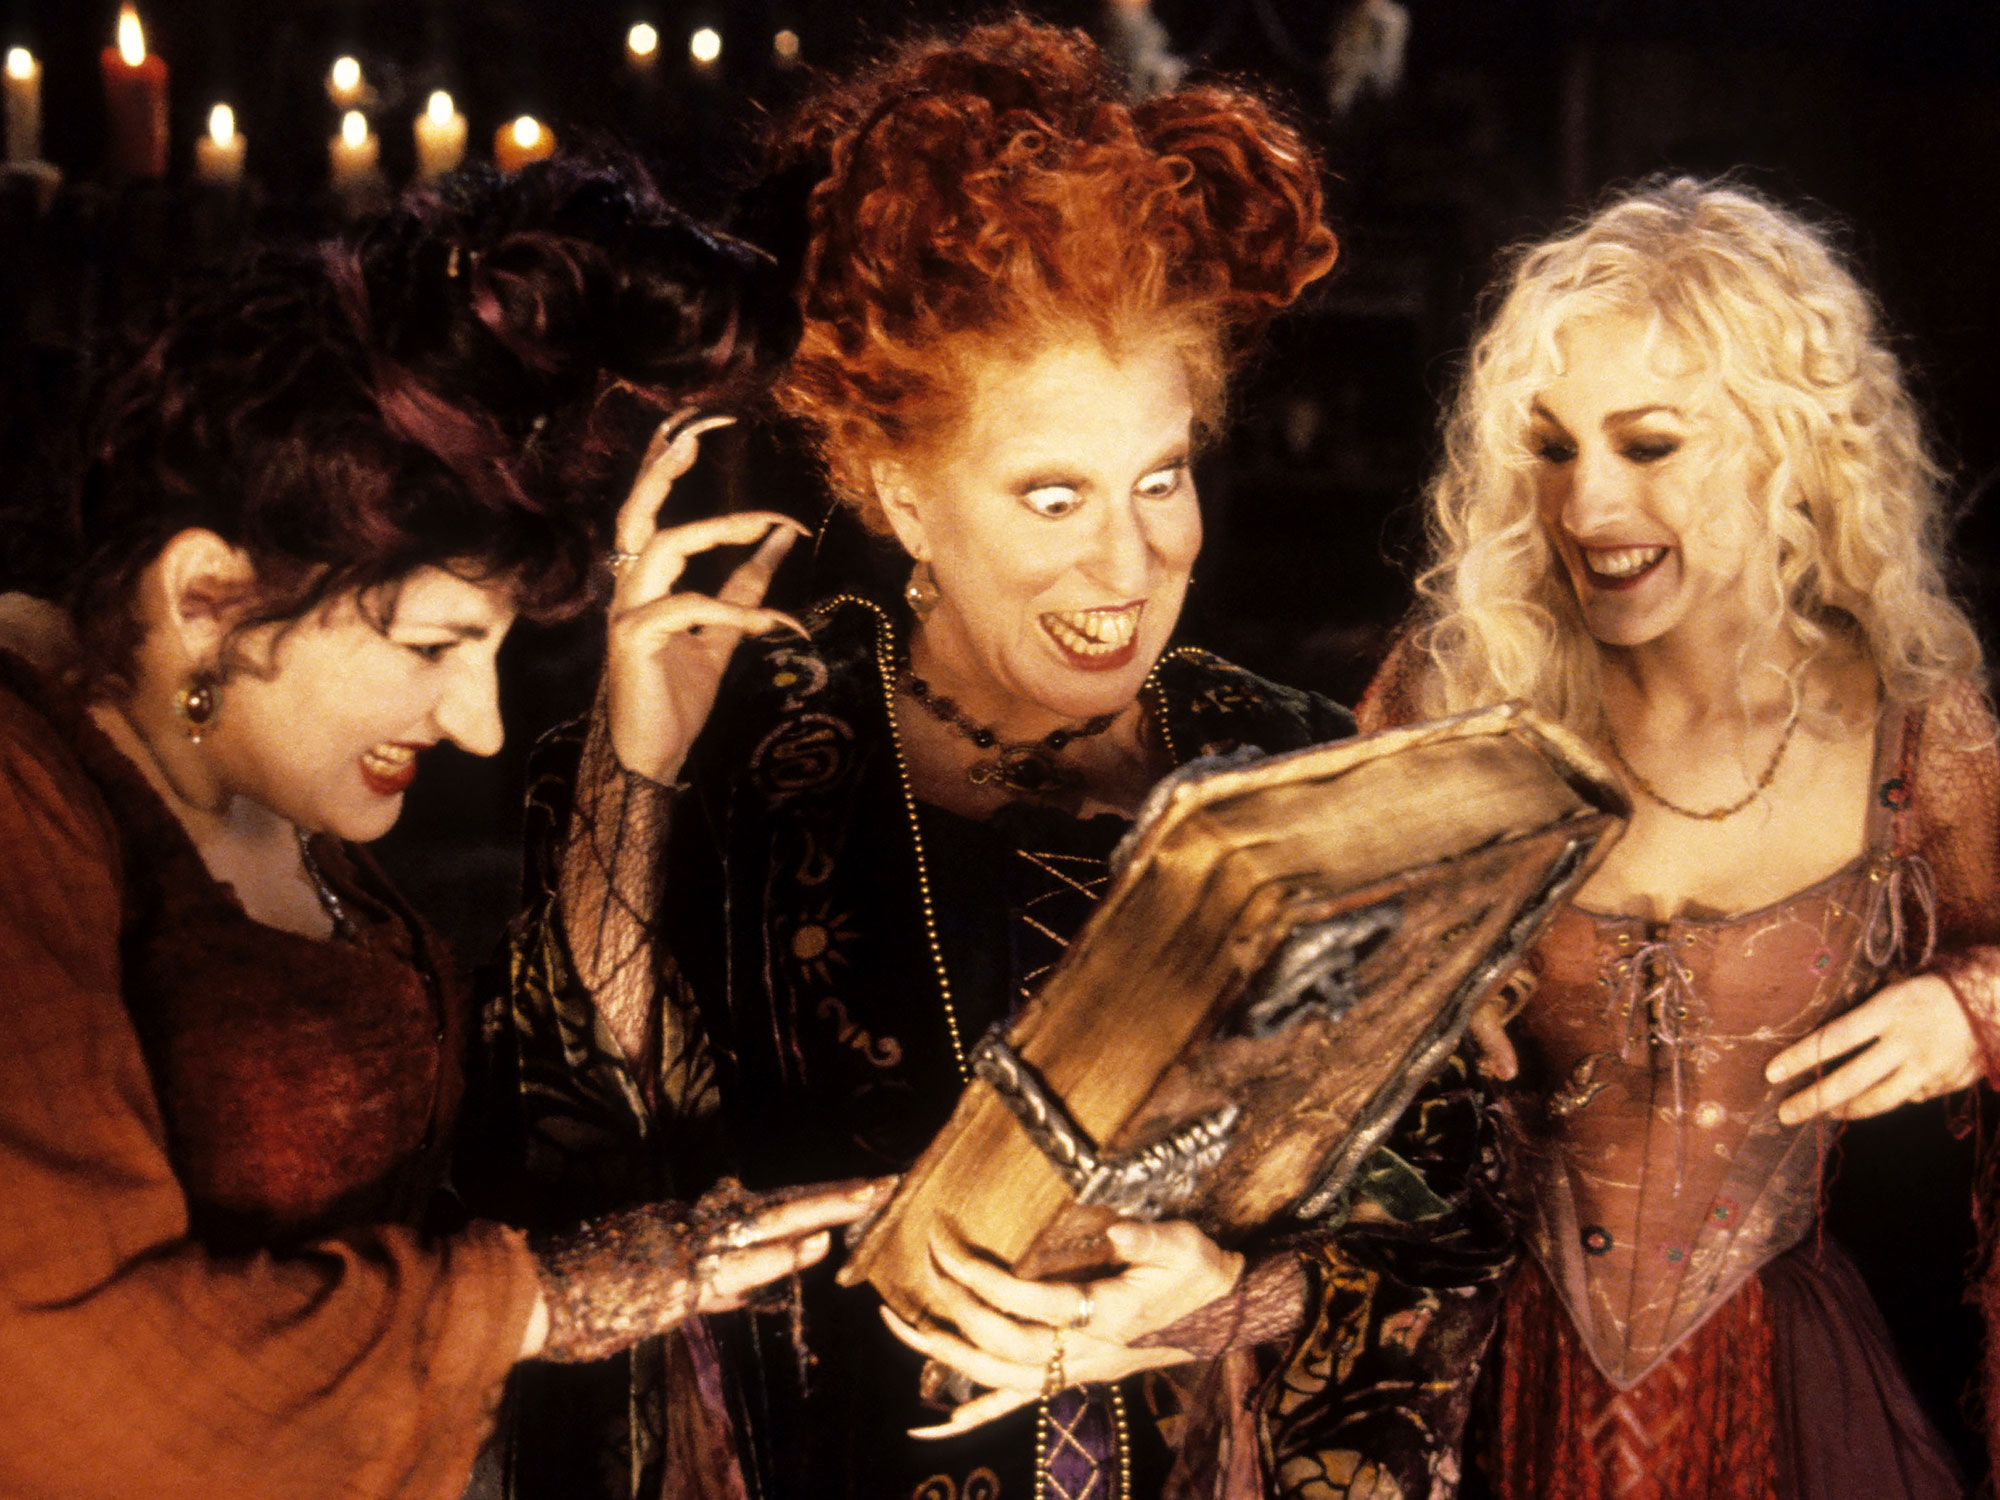 https://www.usmagazine.com/wp-content/uploads/2021/10/Lets-Fly-Everything-We-Know-So-Far-About-Hocus-Pocus-2-006.jpg?quality=74&strip=all